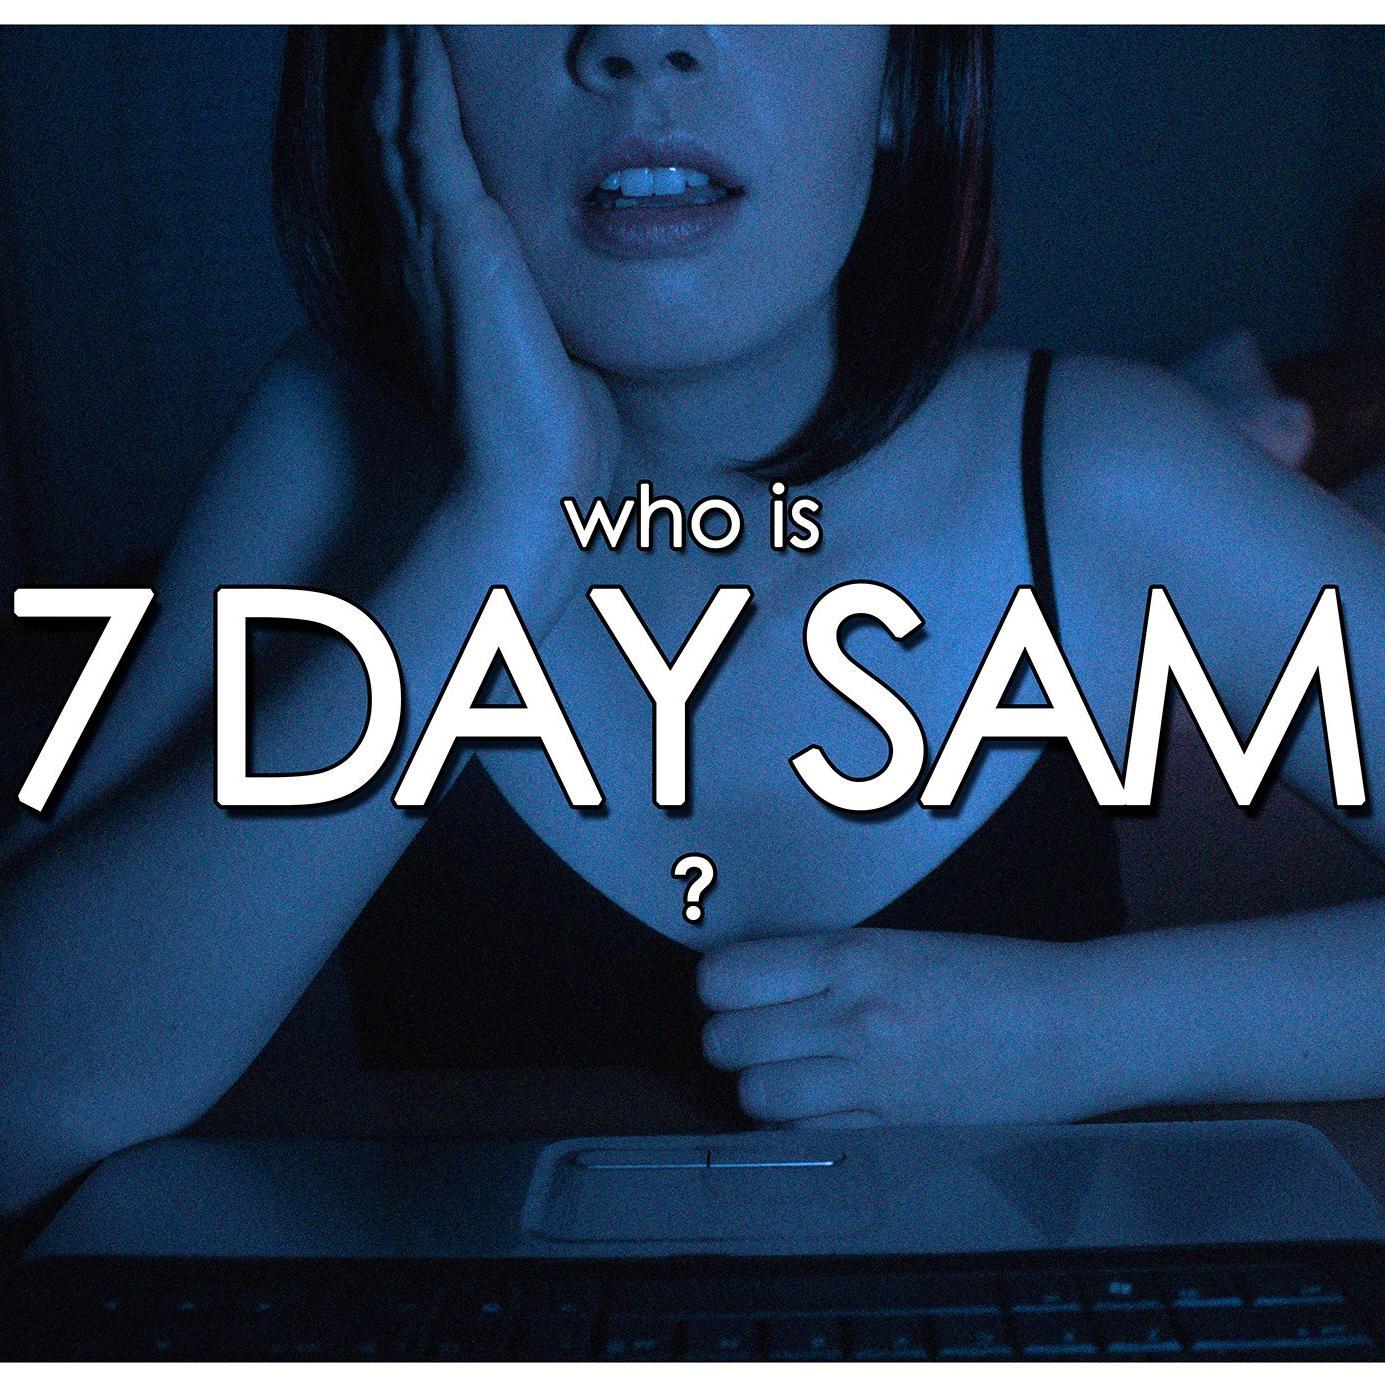 A clinically depressed teenage girl becomes fixated with a viral video blogger who claims she will commit suicide live on the internet in 7 days.